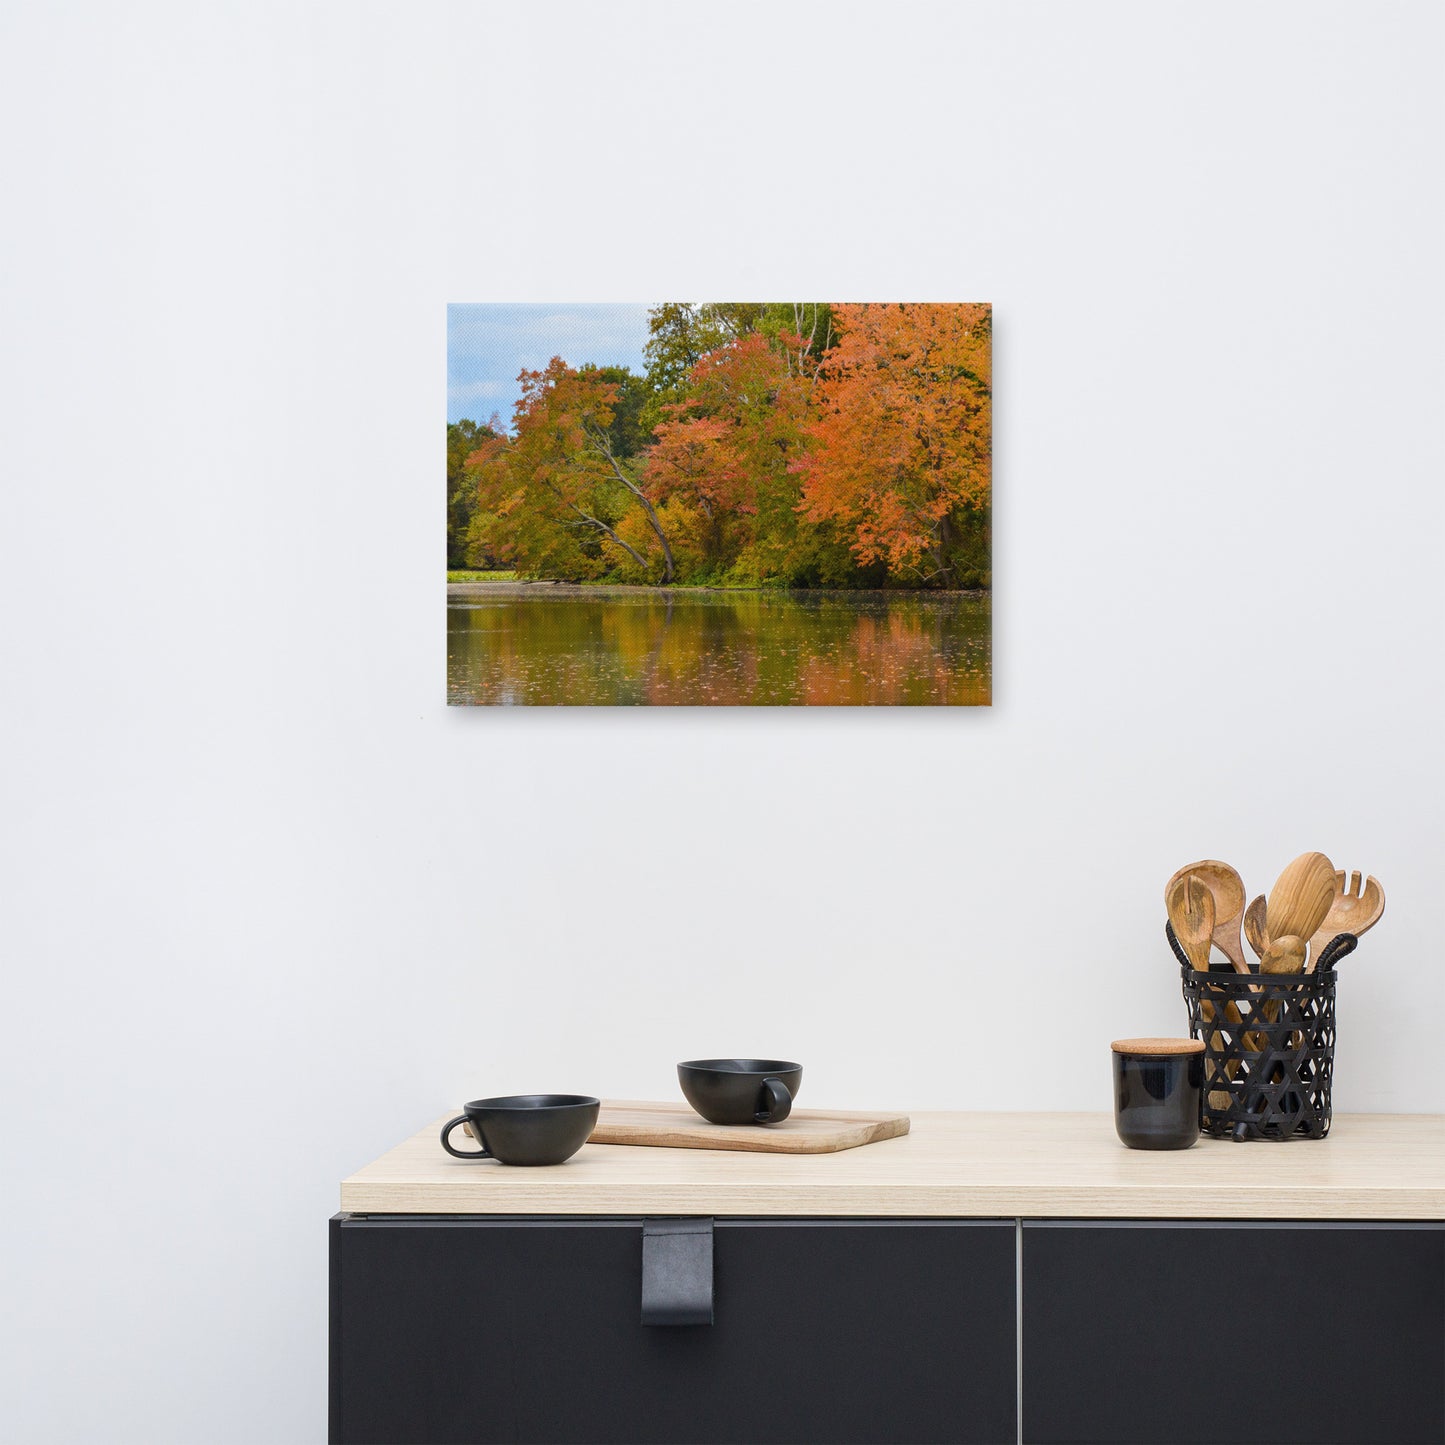 Orange Wall Art For Kitchen: Autumn Tree Line - Rural / Country Style Landscape / Nature Canvas Photograph Wall Art Print - Artwork - Wall Decor